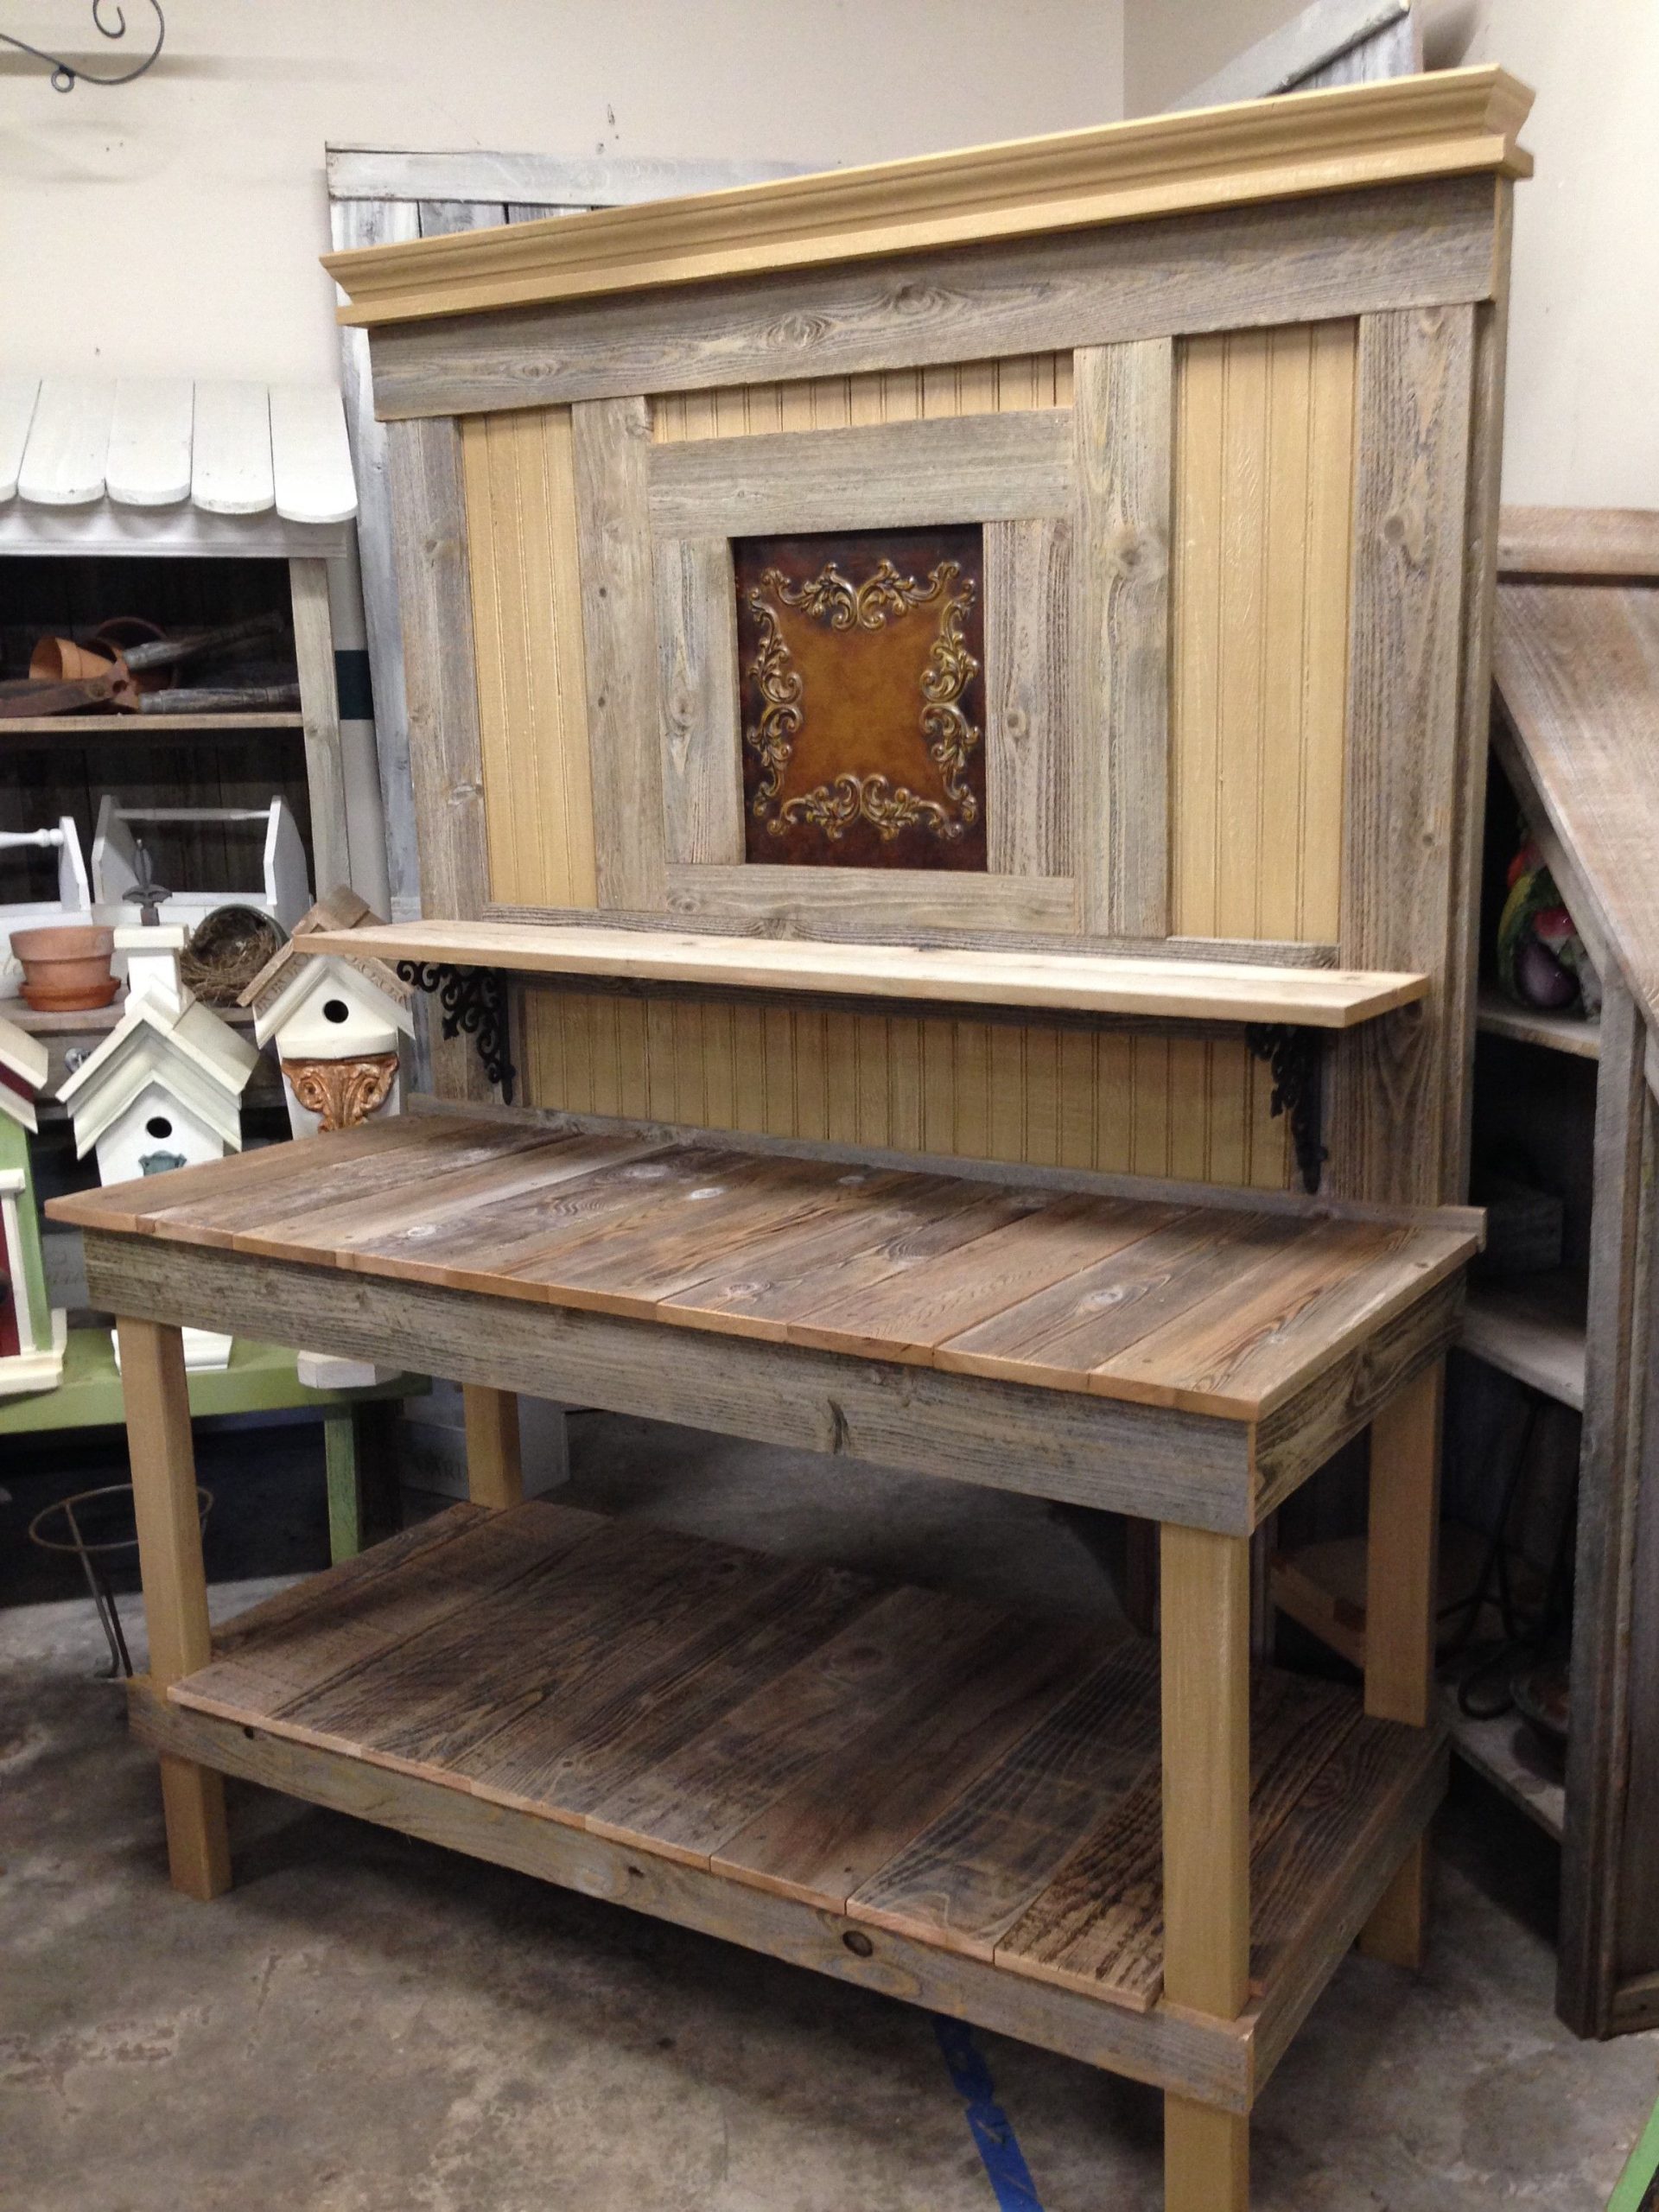 Building a Shed has Never Been so Easy - My newest potting bench design